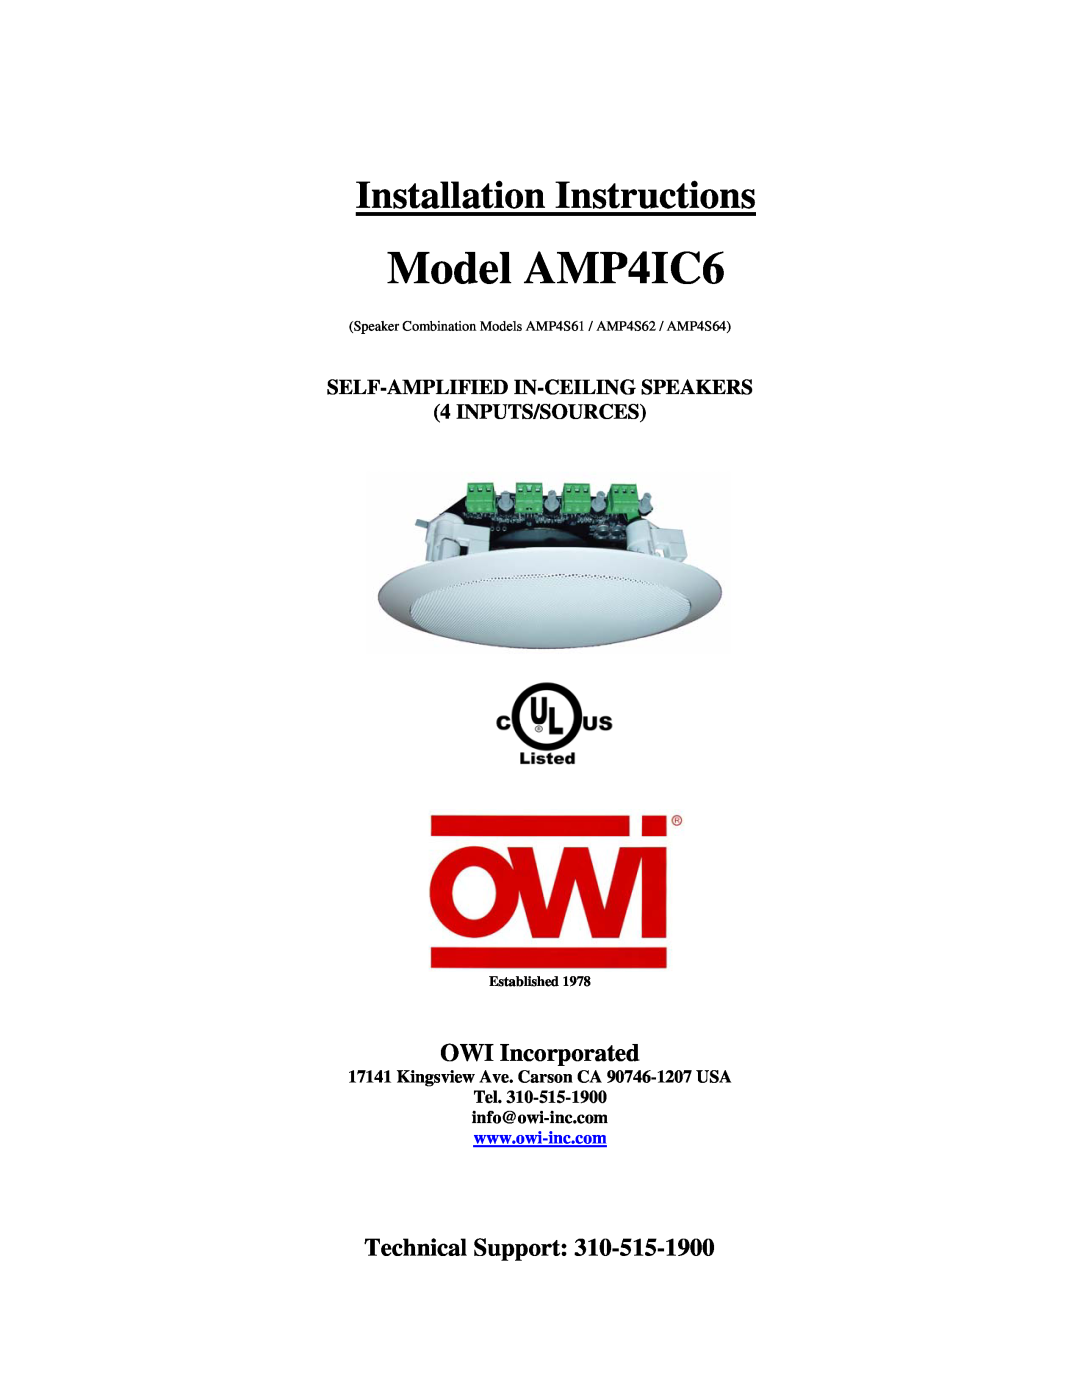 OWI installation instructions OWI Incorporated, Technical Support, Model AMP4IC6, Installation Instructions 